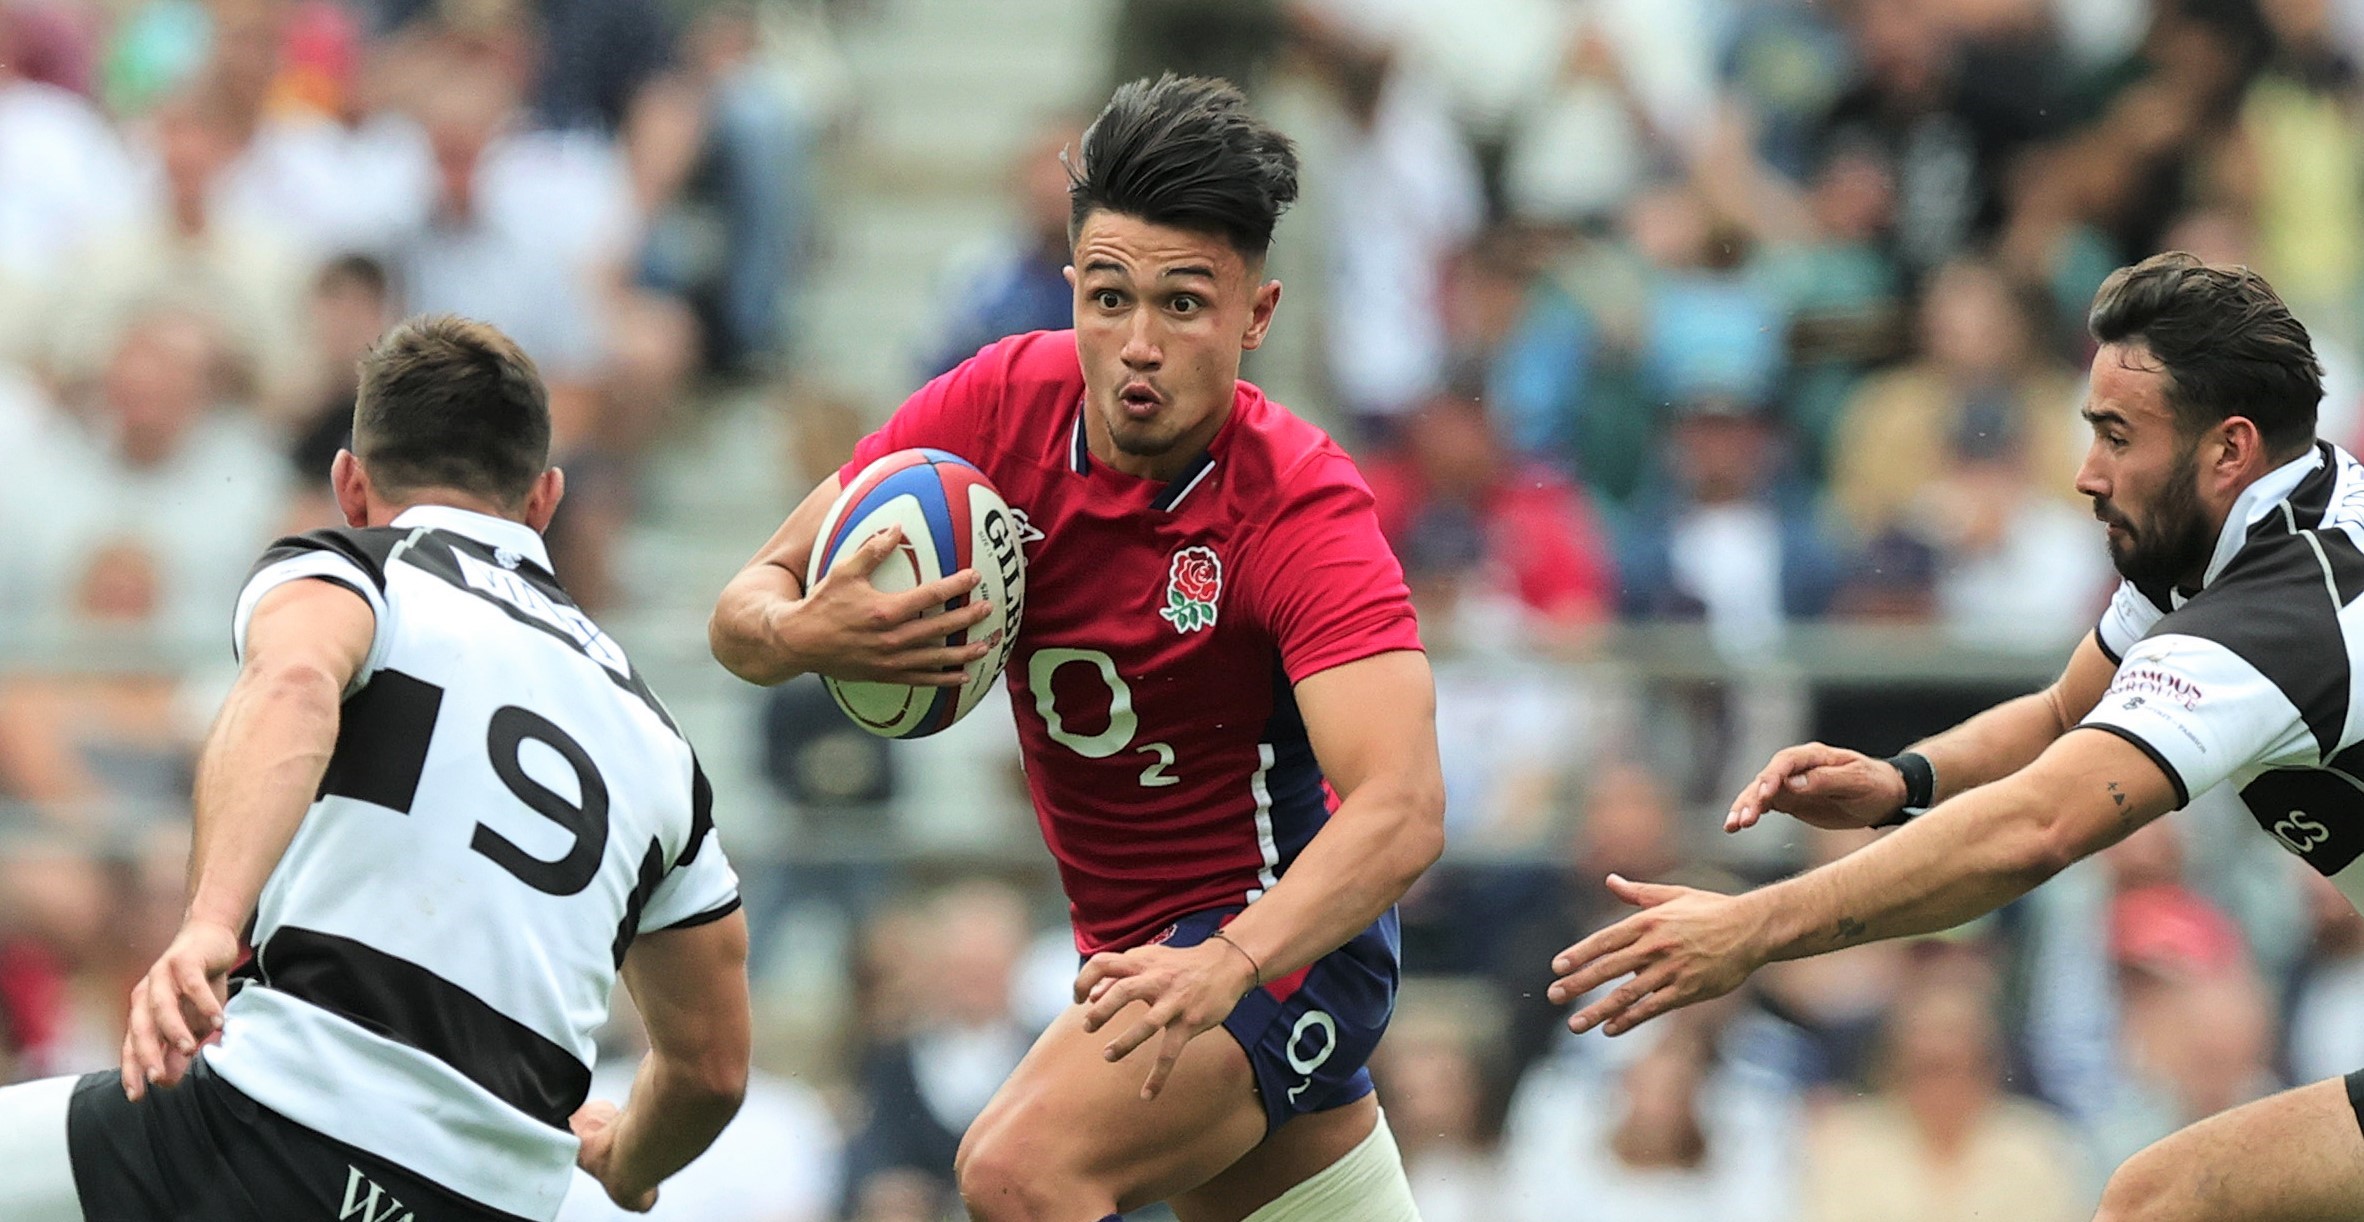 LONDON, ENGLAND - JUNE 19: Marcus Smith of England runs with the ball during the International match between England and Barbarians at Twickenham Stadium on June 19, 2022 in London, England. (Photo by David Rogers/Getty Images)